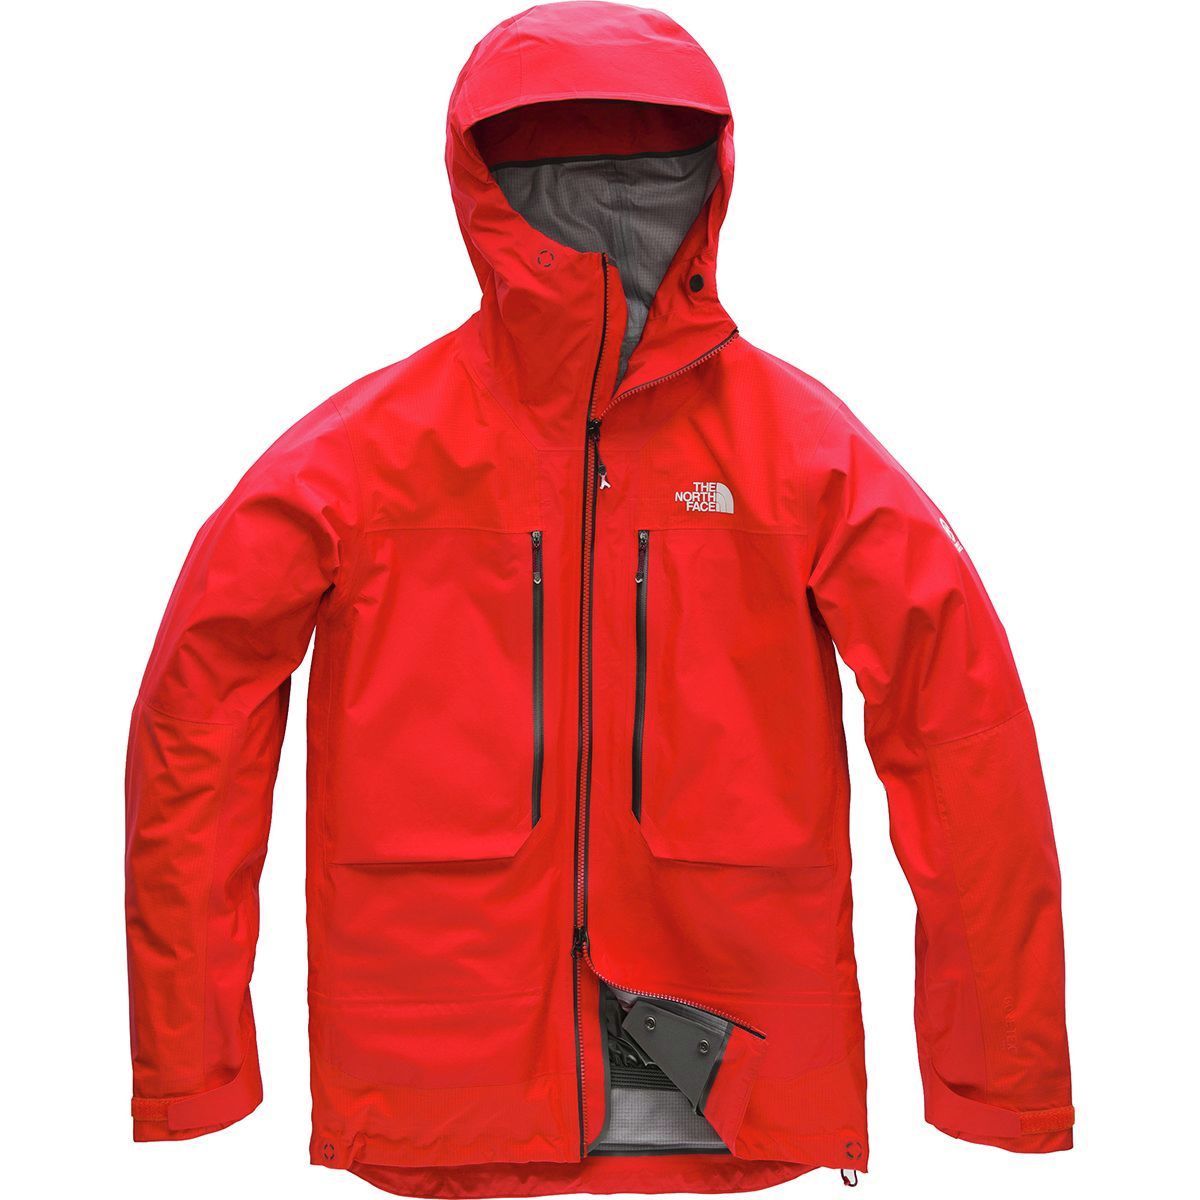 The North Face Summit L5 GTX Pro Jacket - Men's - Clothing